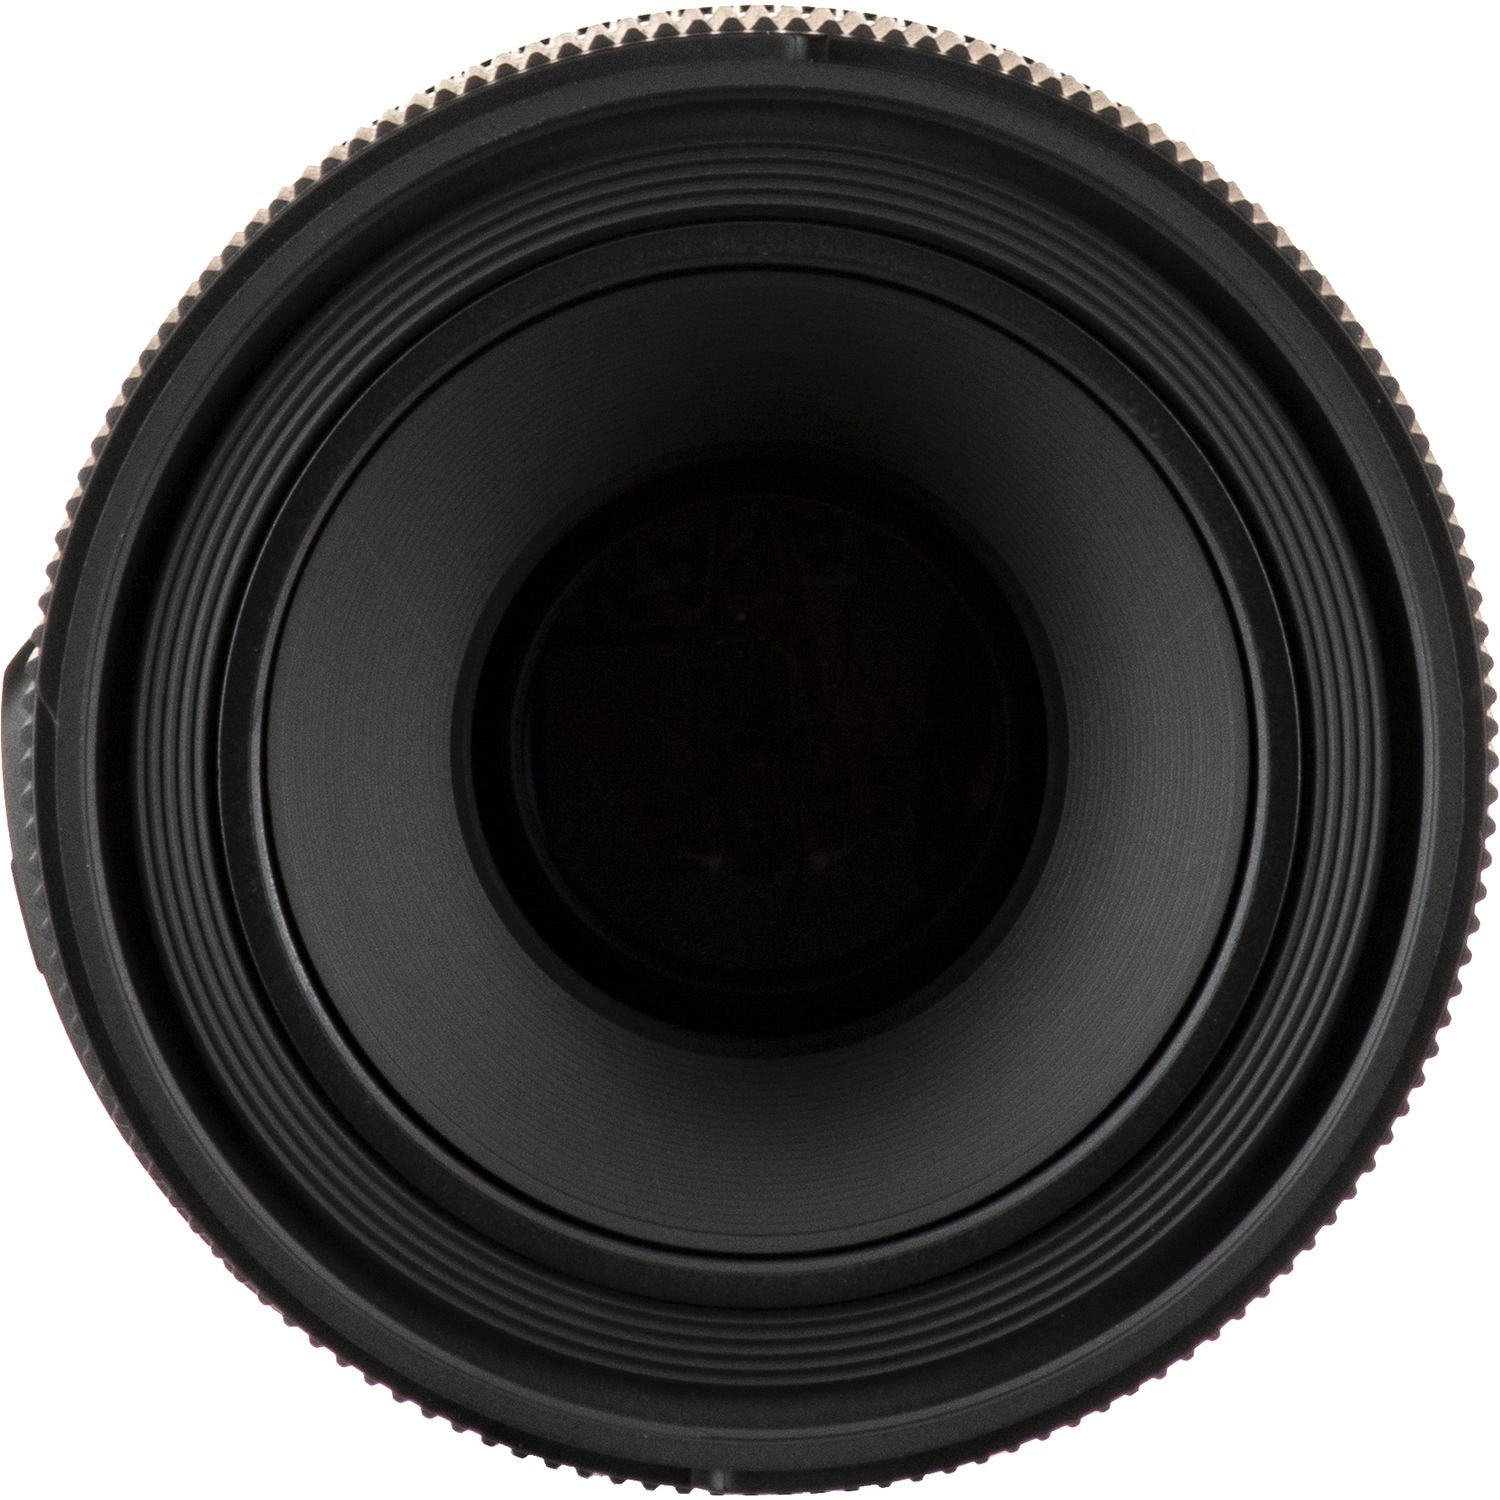 Sigma 70mm F2.8 DG Macro Art Lens for Canon EF in a Front Close-Up View